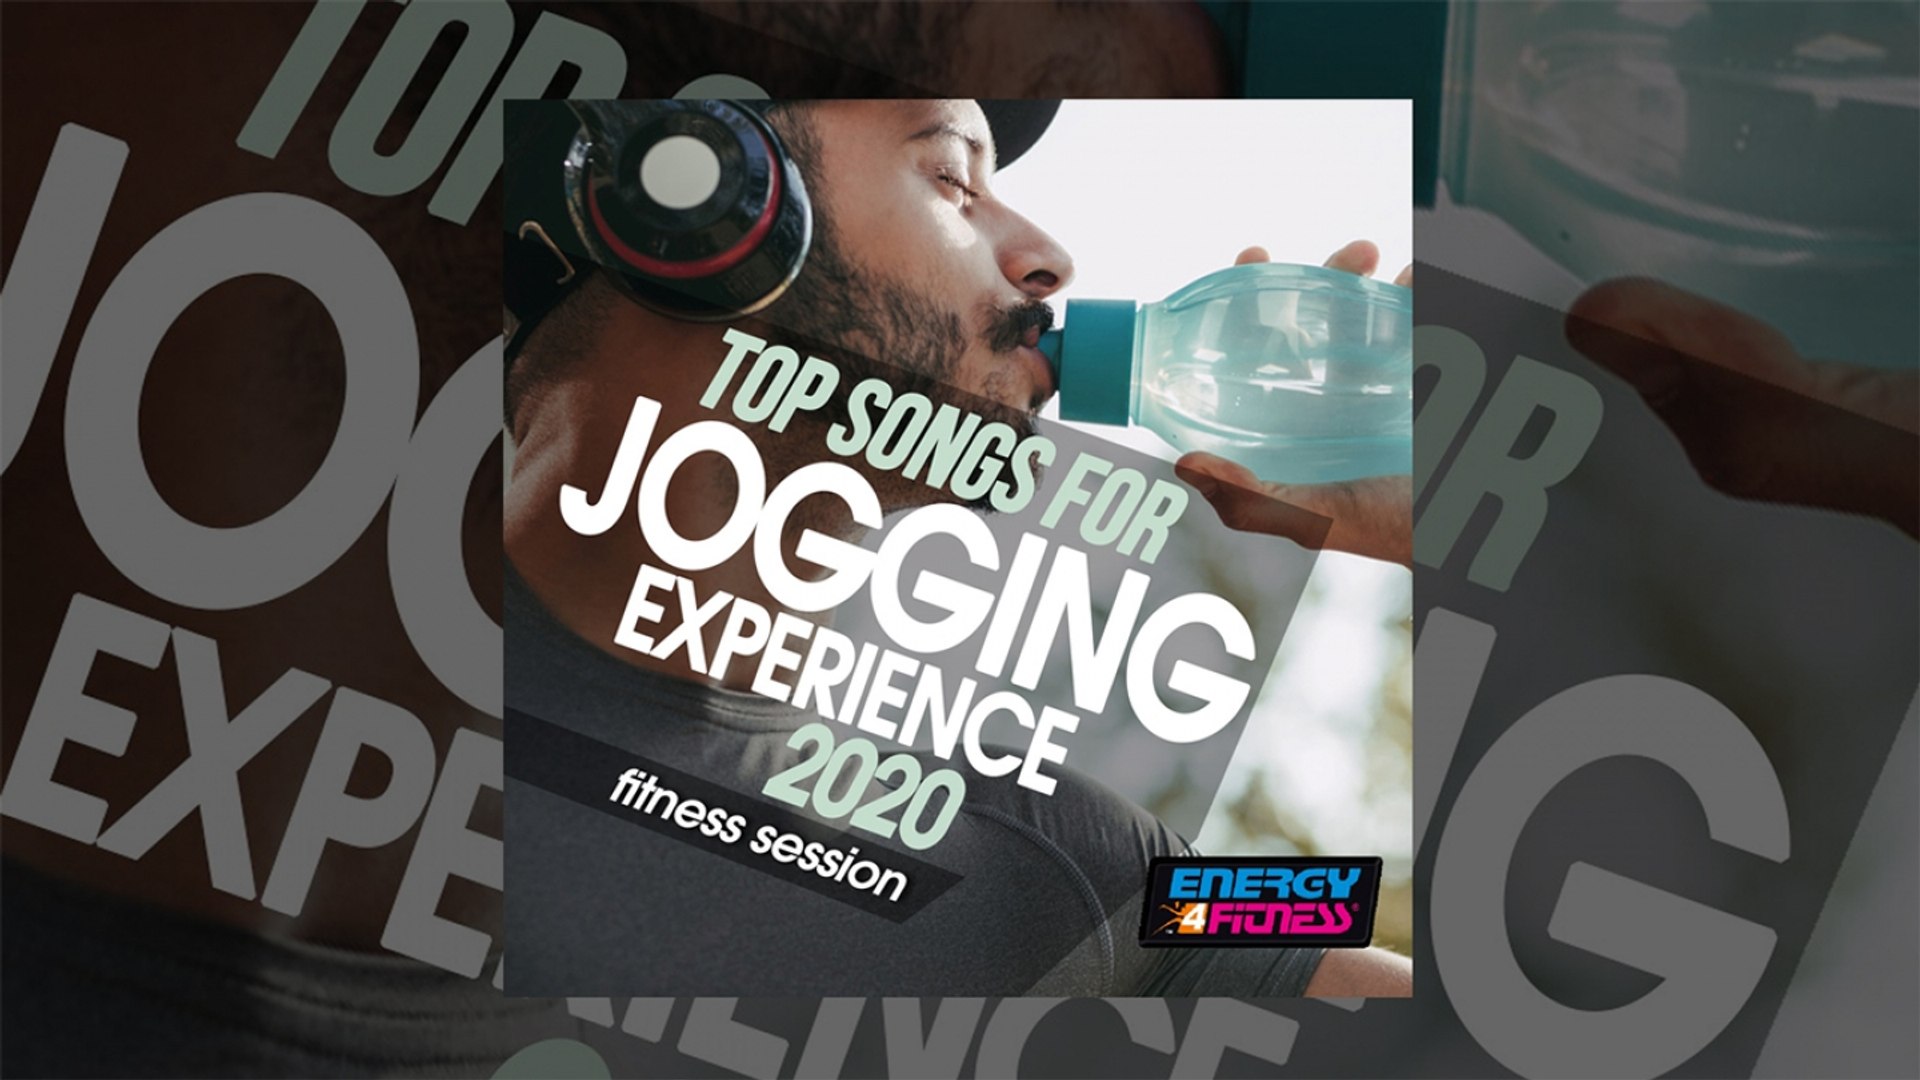 E4F - Top Songs For Jogging Experience 2020 Fitness Session - Fitness & Music 2020